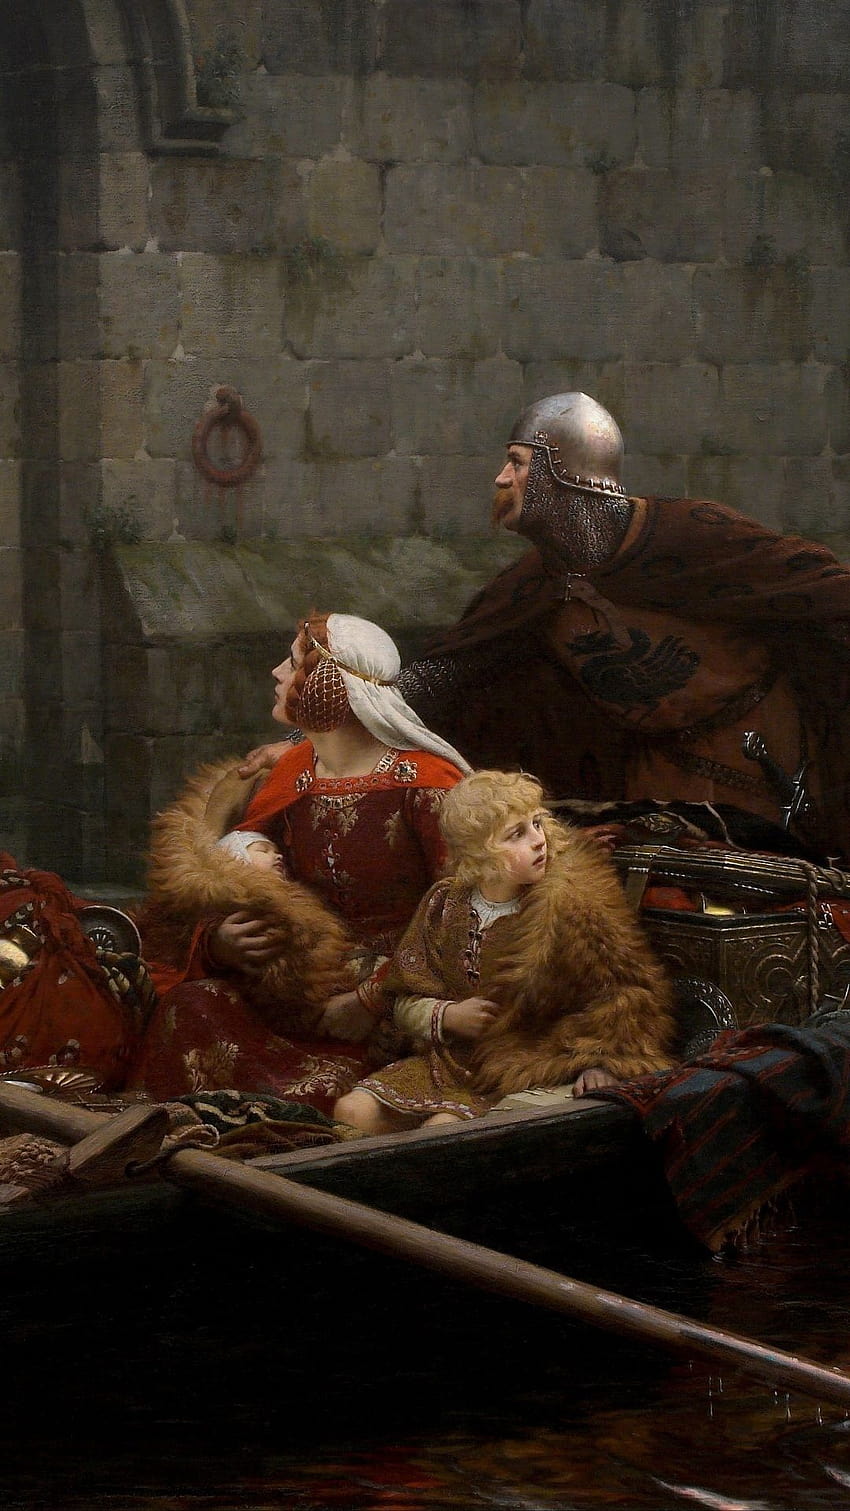 1080x1920 edmund blair leighton, english painter, in time of peril, middle ages, romanticism, pre HD phone wallpaper